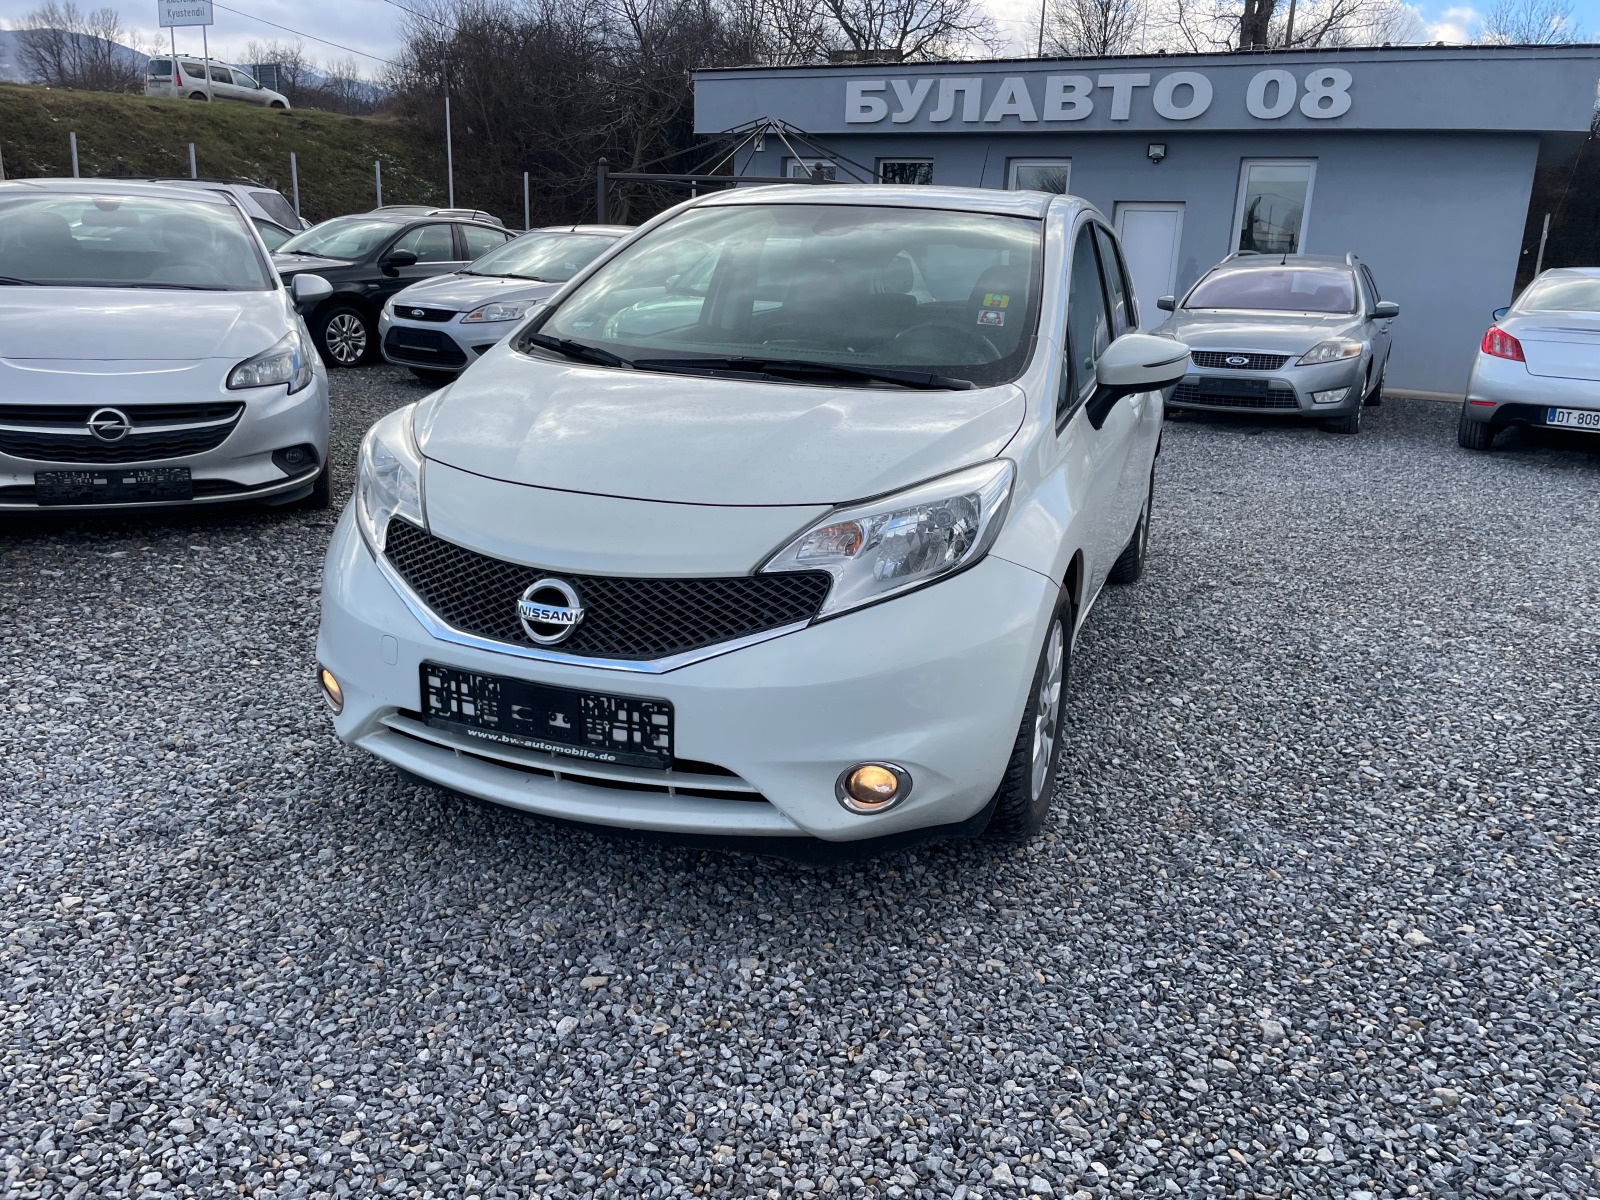 Nissan Note 1.5 DCI EVRO 5 - [1] 